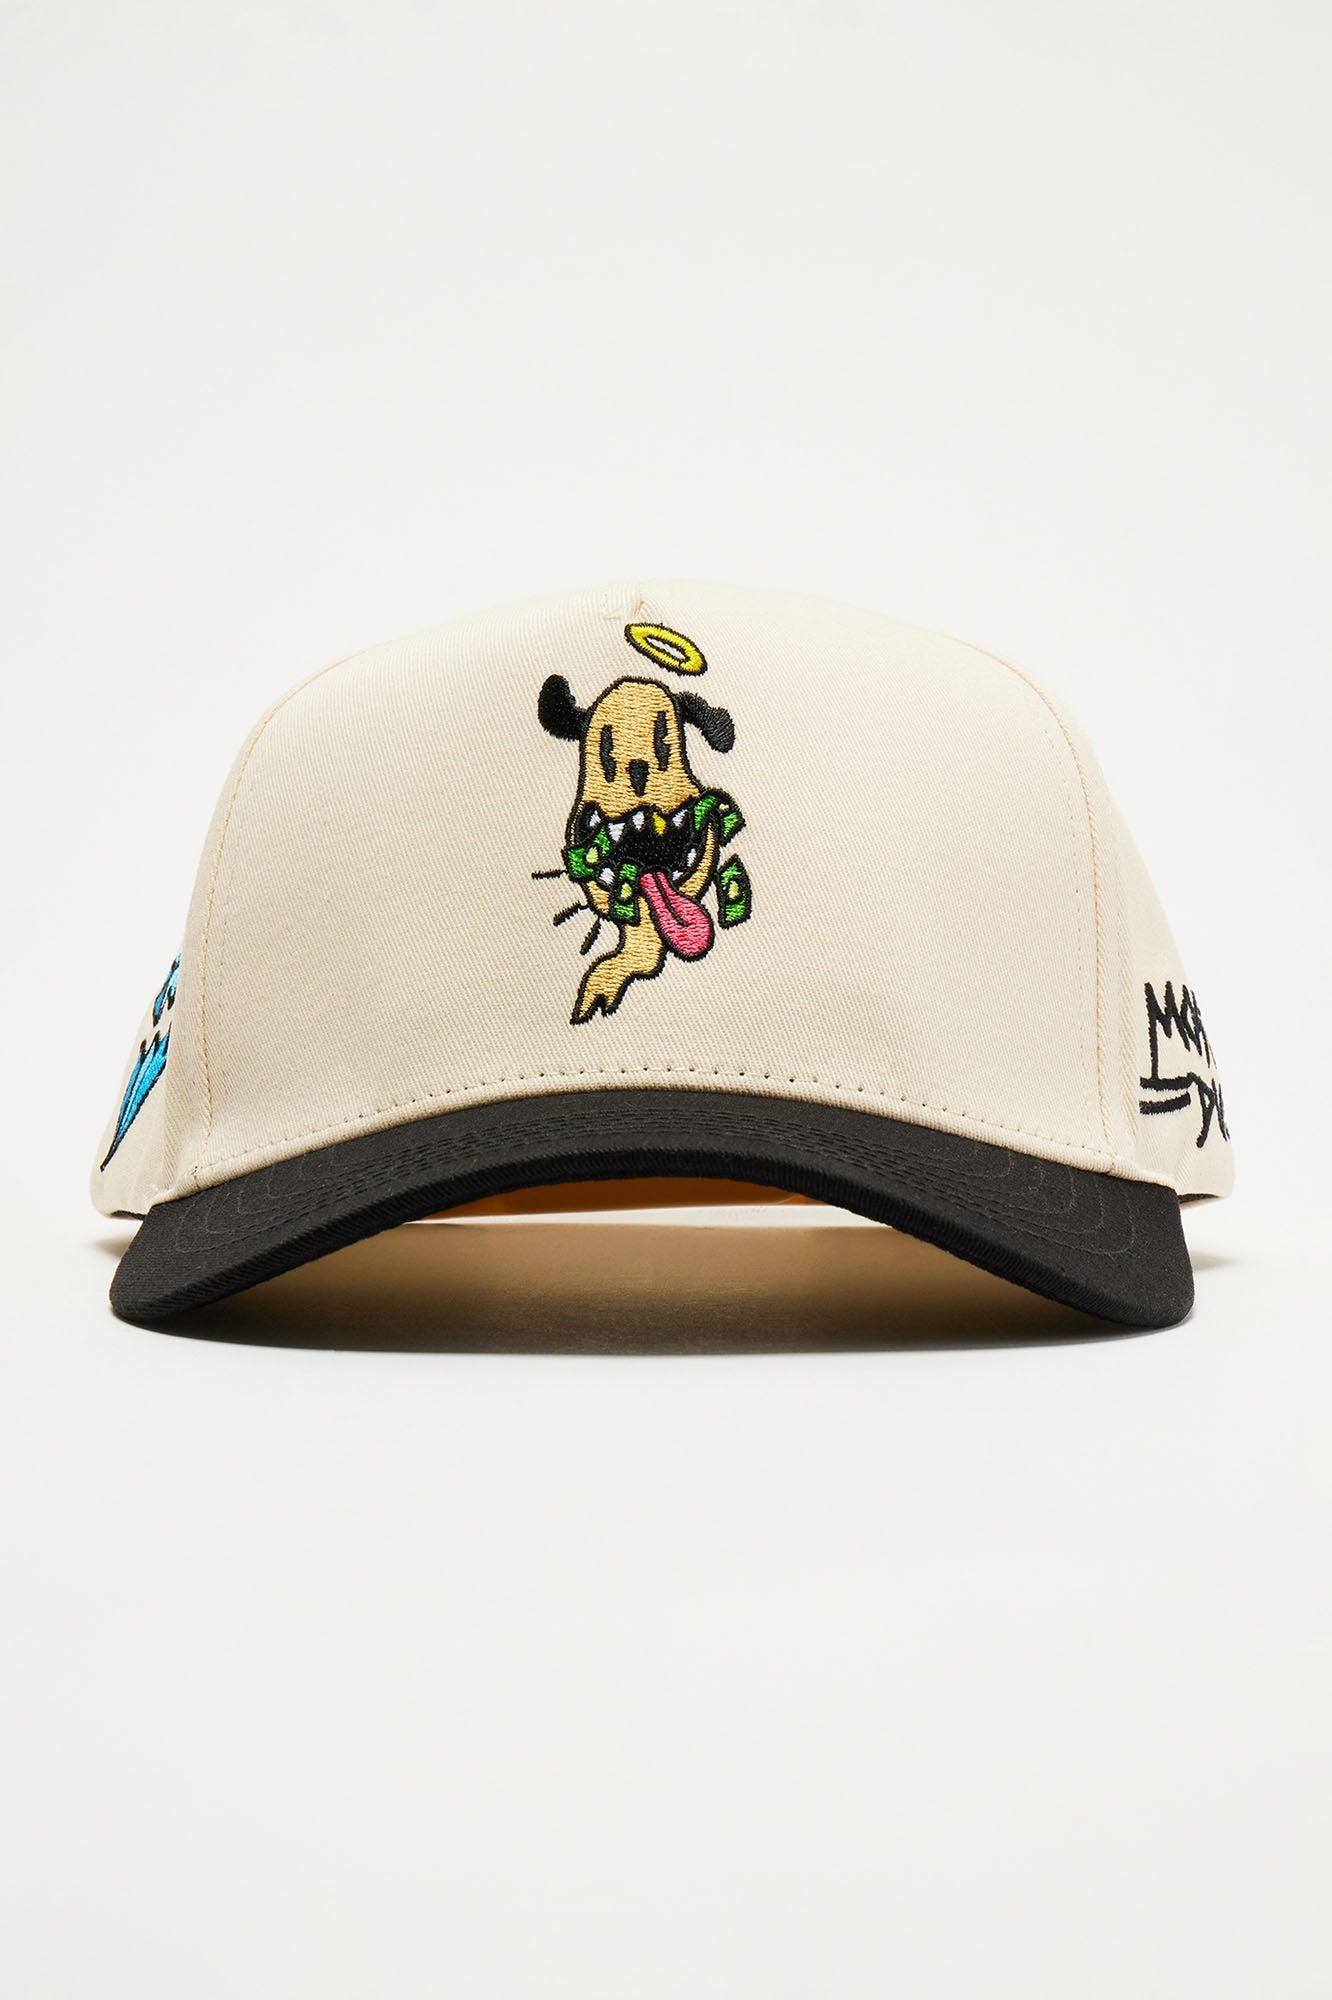 Tan-Tastic: The Most Overdue Snapback Hat